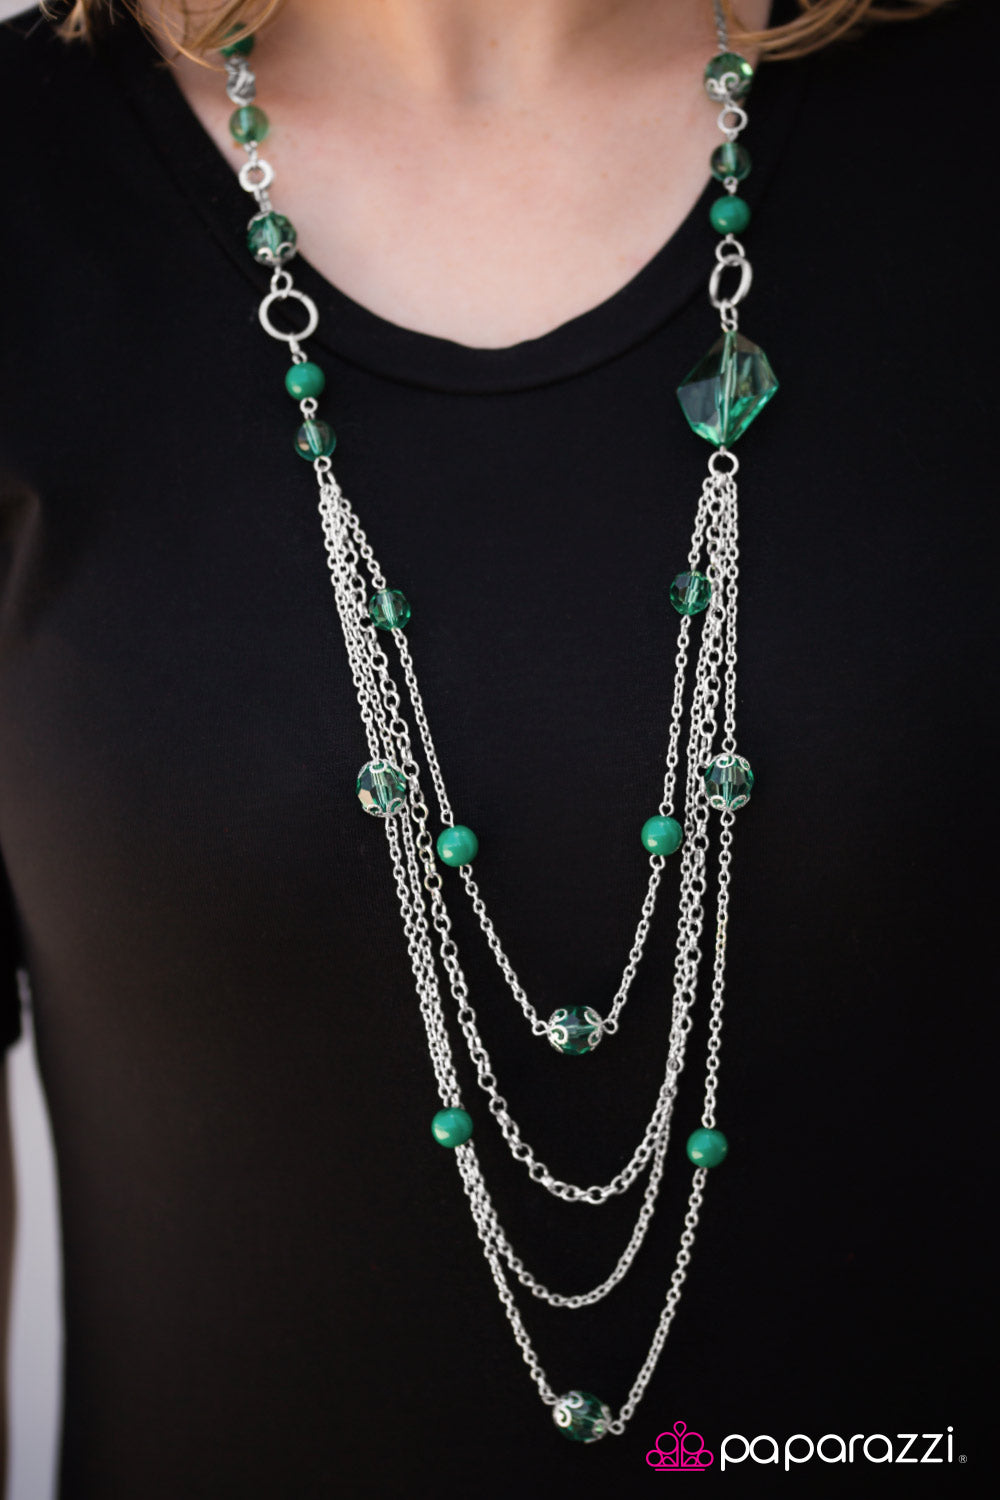 Fool For Jewels - Green - Paparazzi necklace